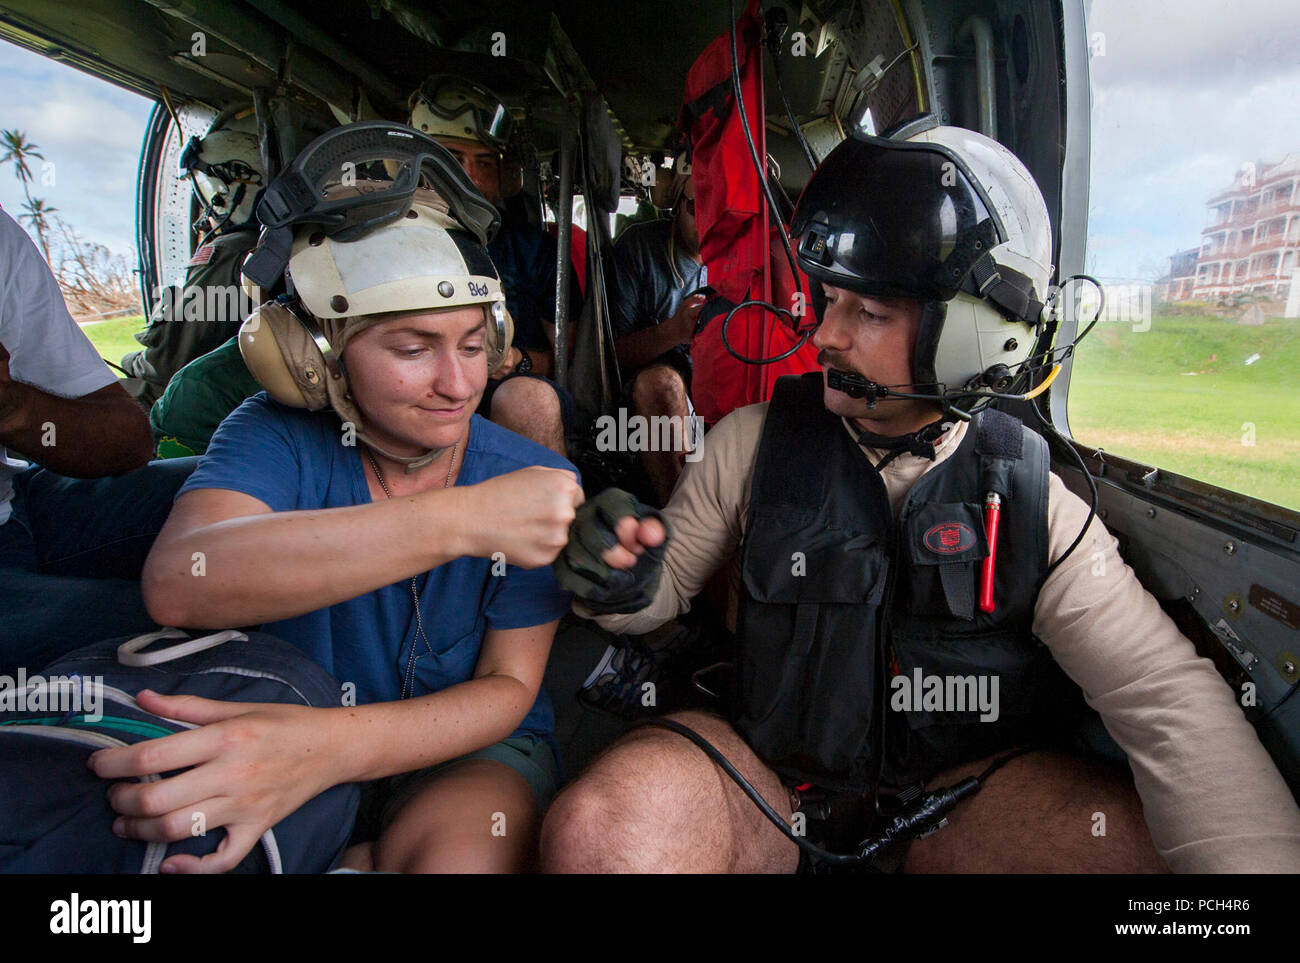 DOMINICA (Sept. 24, 2017) Naval Aircrewman (Helicopter) 2nd Class Andy Blessing "fist bumps" an evacuee on an MH-60S Sea Hawk helicopter from Helicopter Sea Combat Squadron 22 (HSC-22), attached to the amphibious assault ship USS Wasp (LHD 1), during humanitarian aid operations on the embattled island of Dominica following the landfall of Hurricane Maria. The Department of Defense is supporting United States Agency for International Development (USAID), the lead federal agency, in helping those affected by Hurricane Maria to minimize suffering and is one component of the overall whole-of-gover Stock Photo